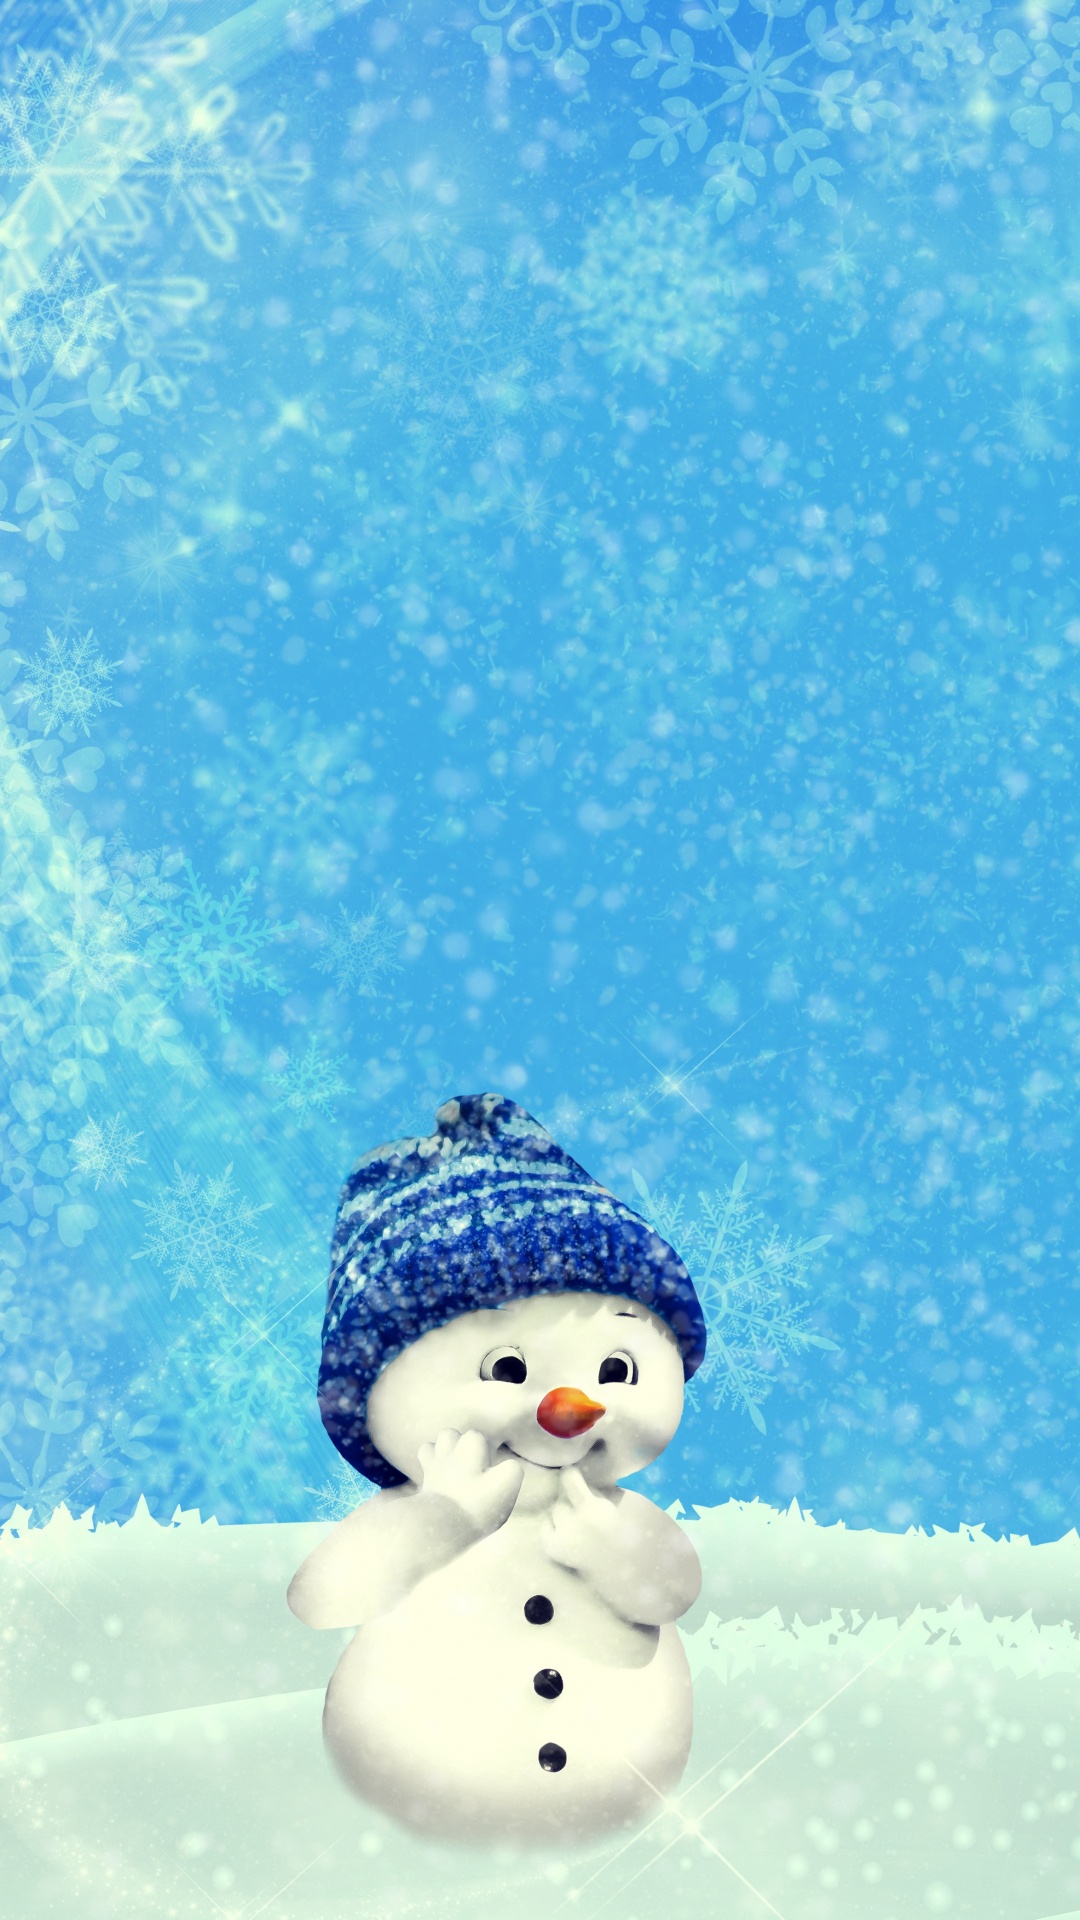 Snowman, Christmas Day, Snow, Winter, Freezing. Wallpaper in 1080x1920 Resolution